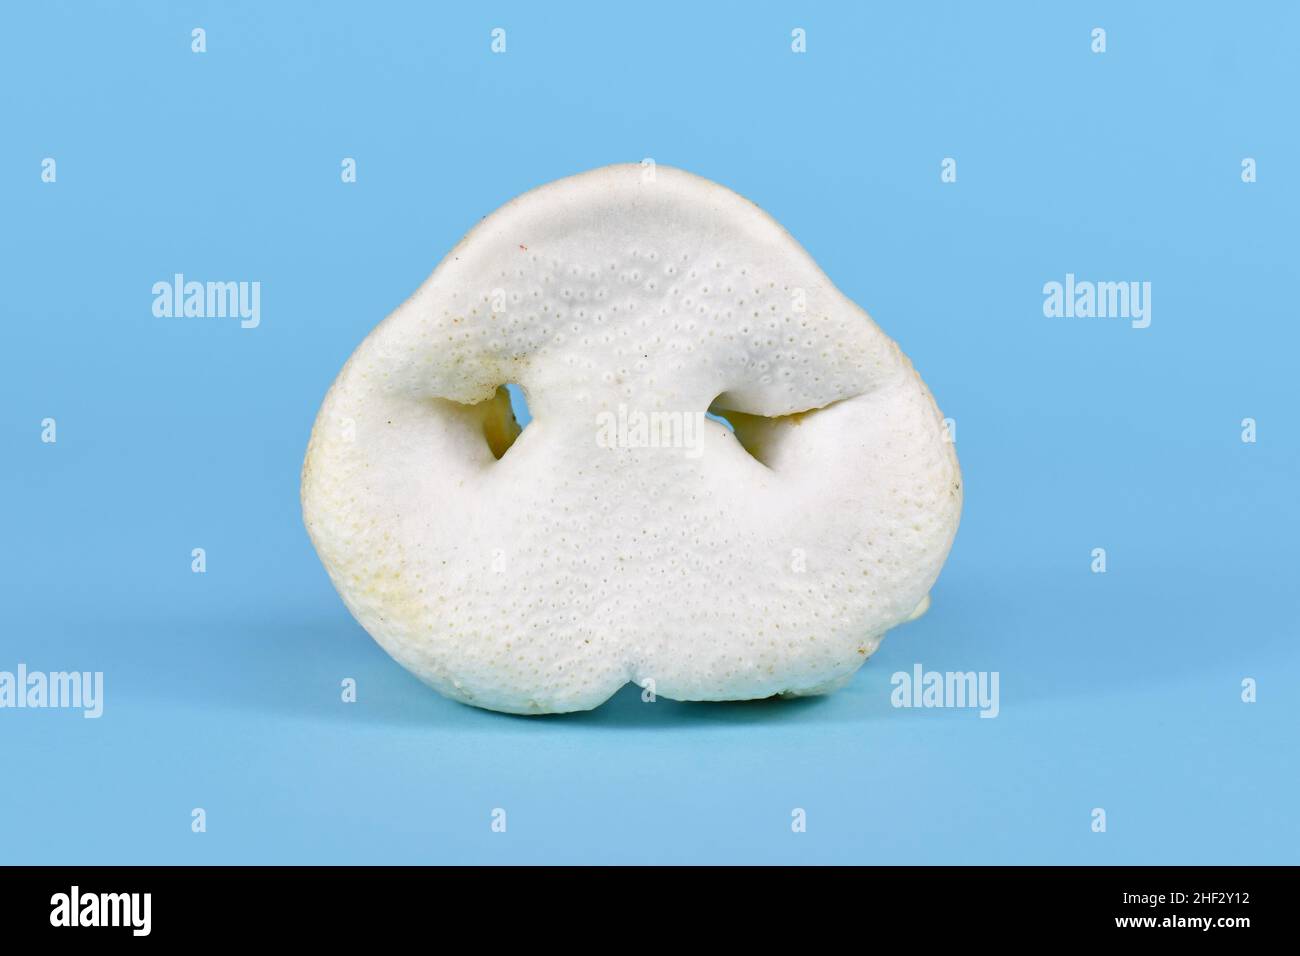 Puffed pig snout used as treats for dogs on blue background Stock Photo